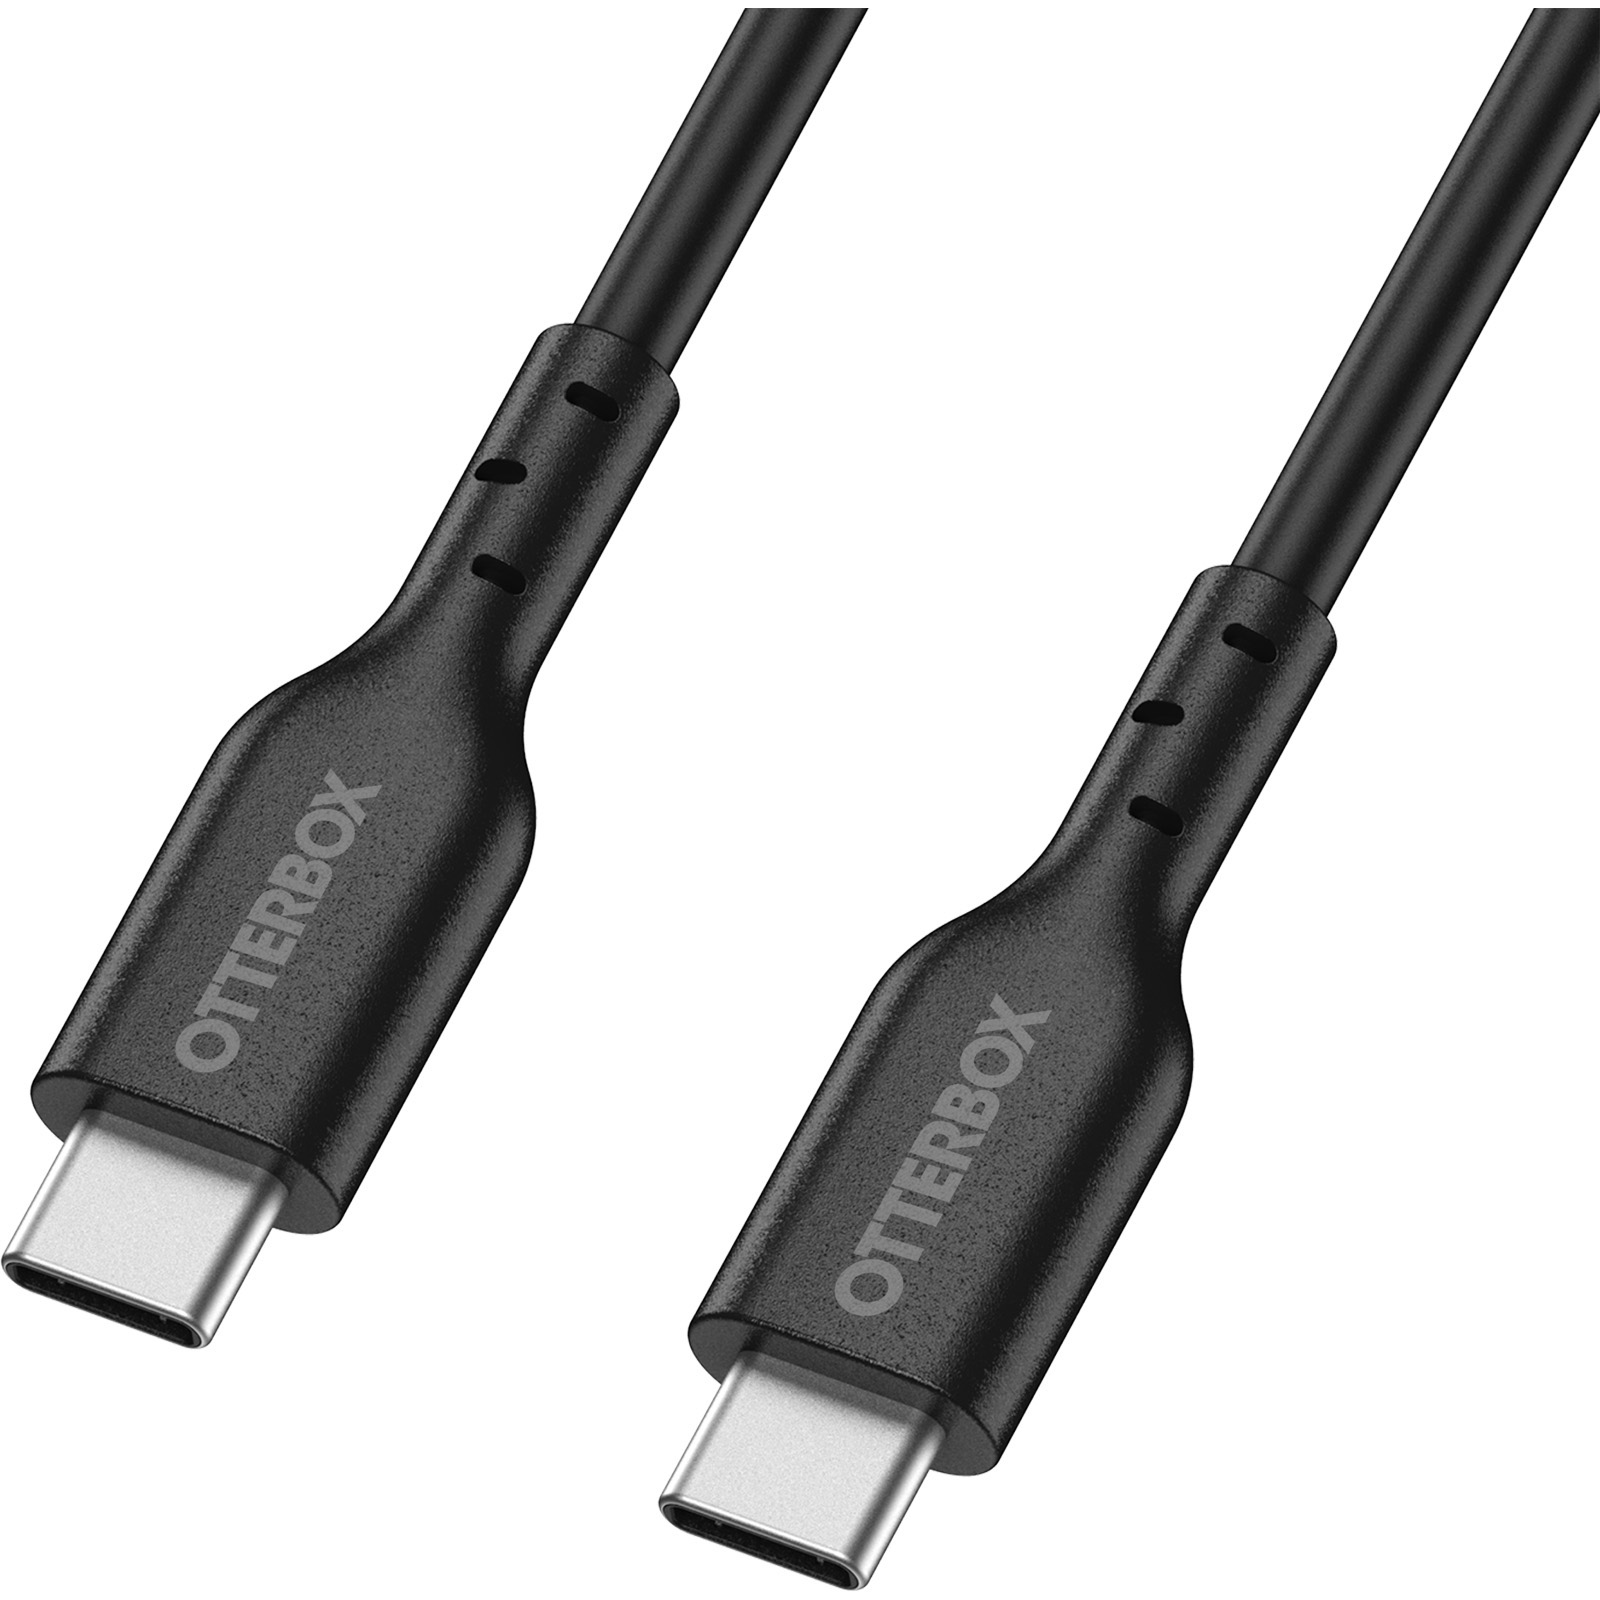 USB-C to USB-C Cable | Fast Charge Standard Black